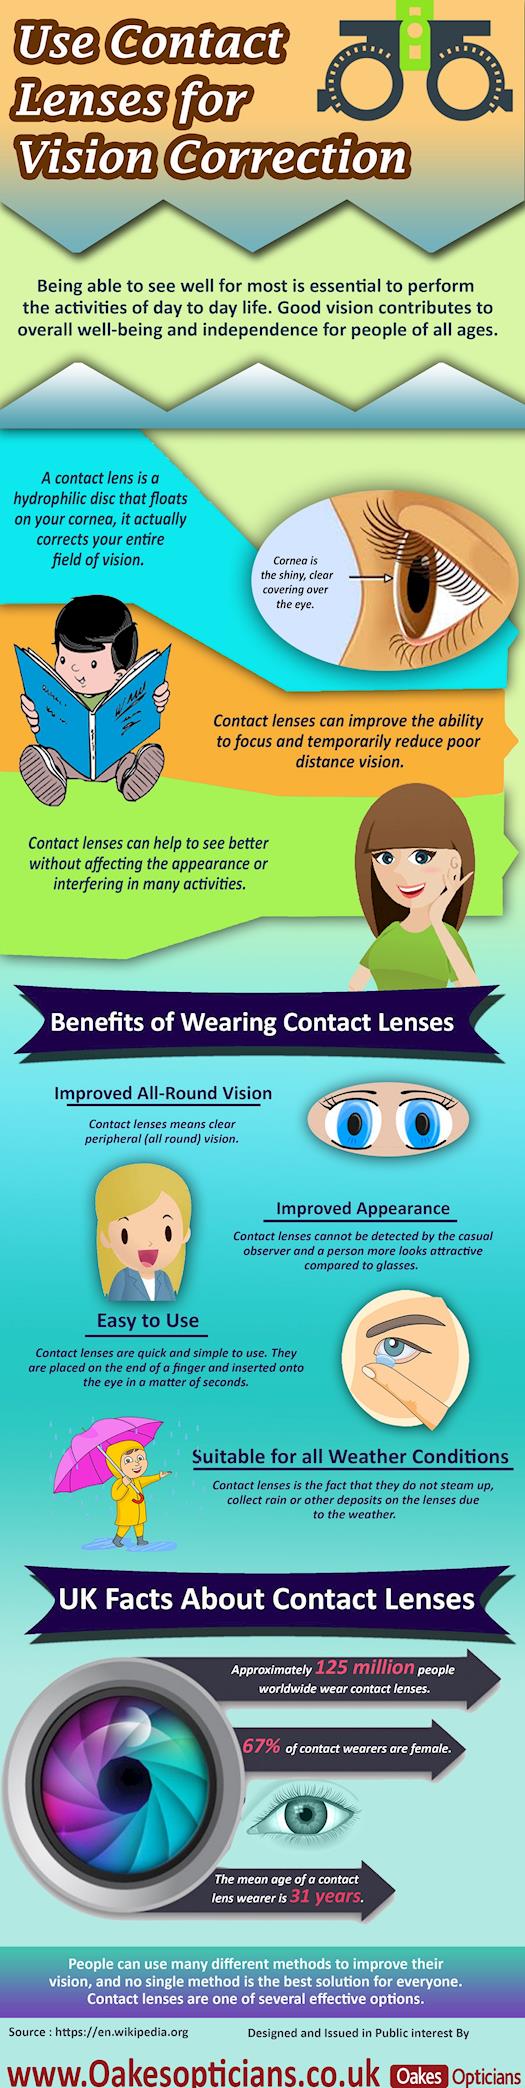 Use Contact Lenses for Vision Correction